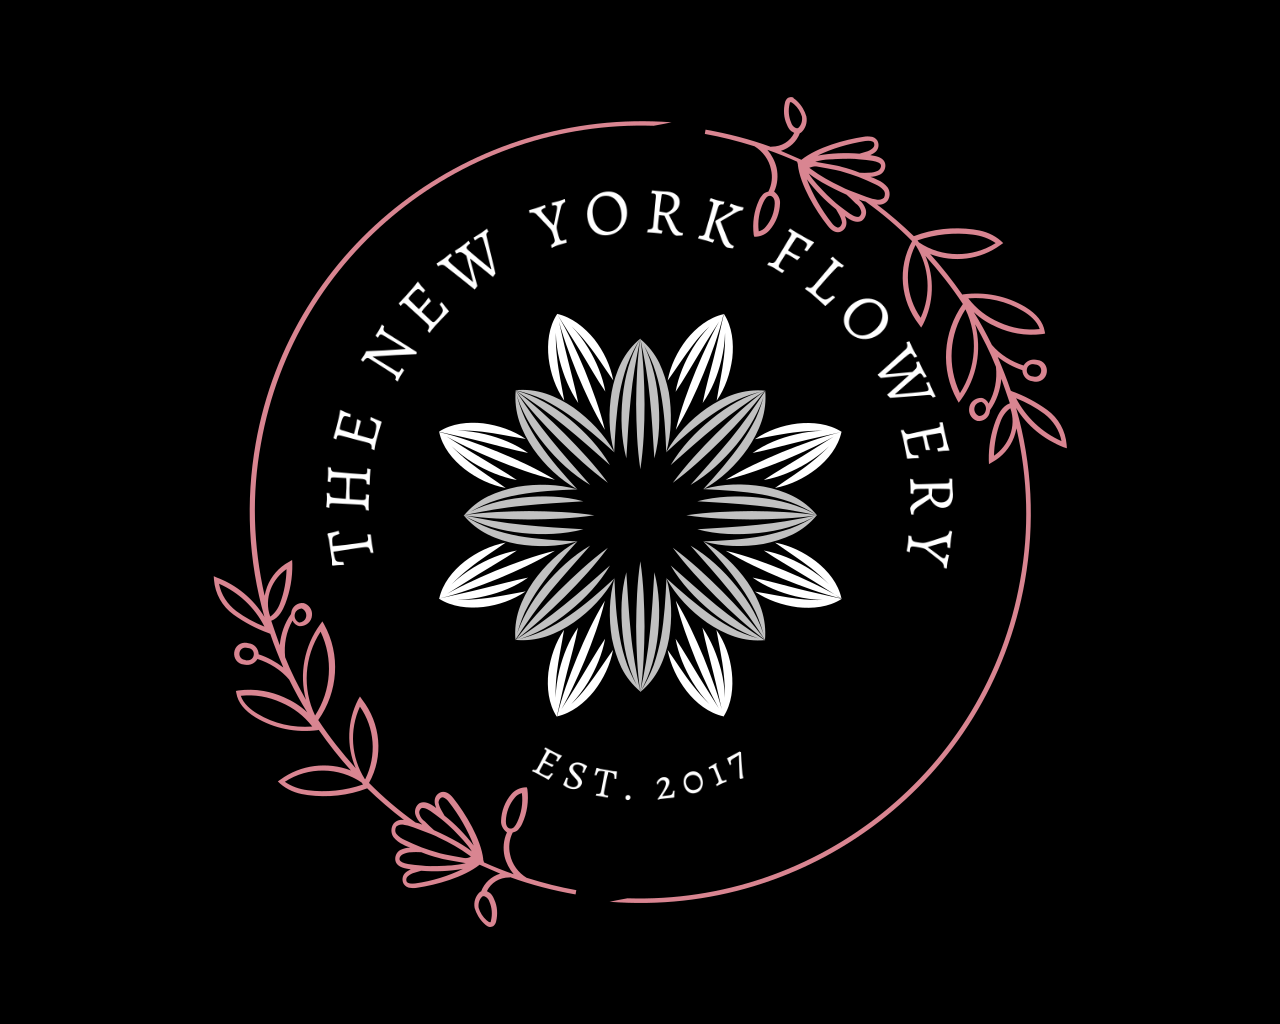 THE NEW YORK FLOWERY's web page